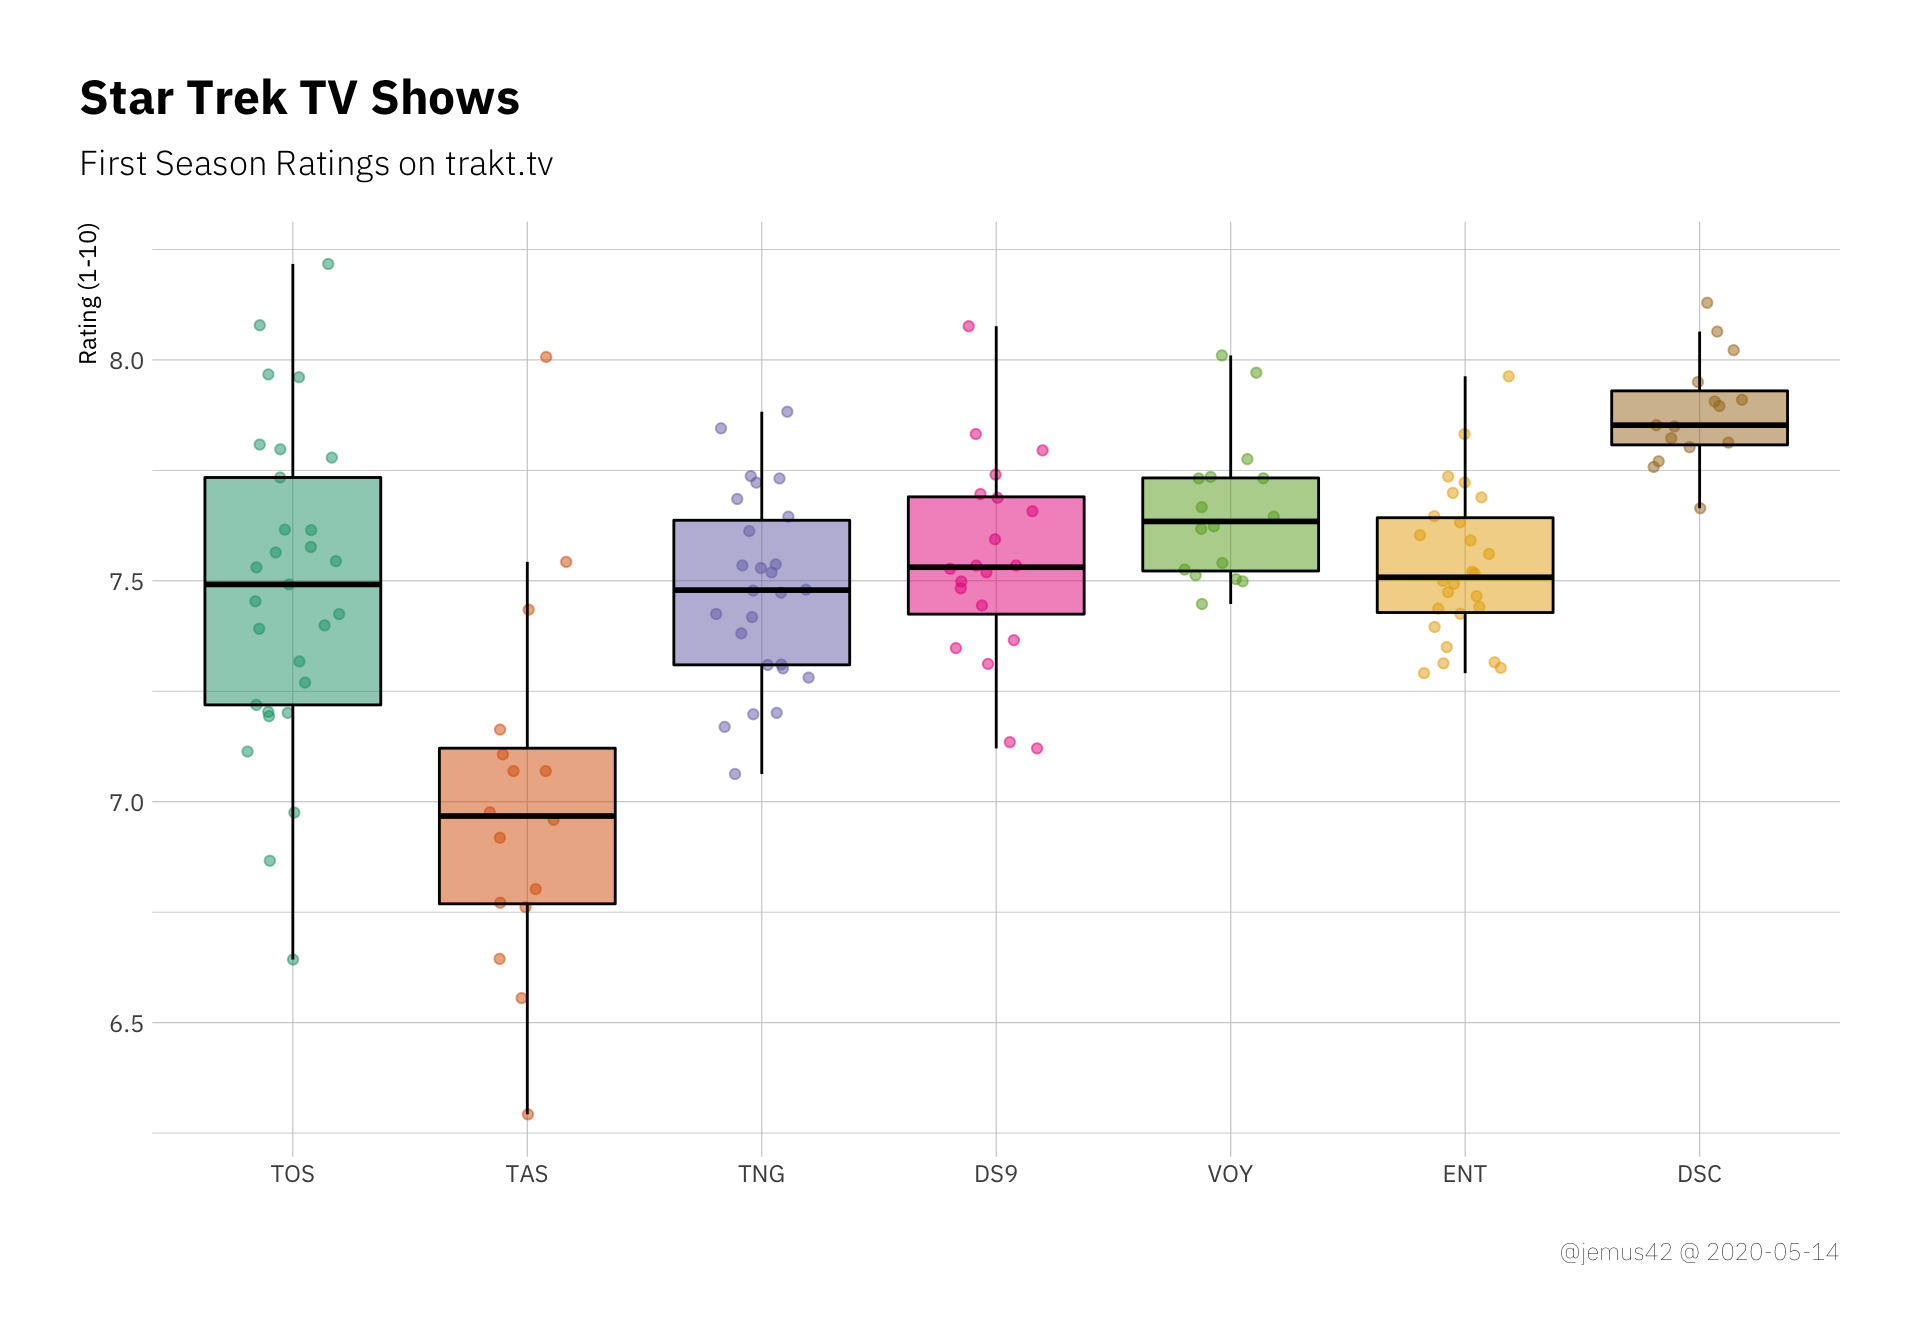 First season episode ratings as boxplots with background dots